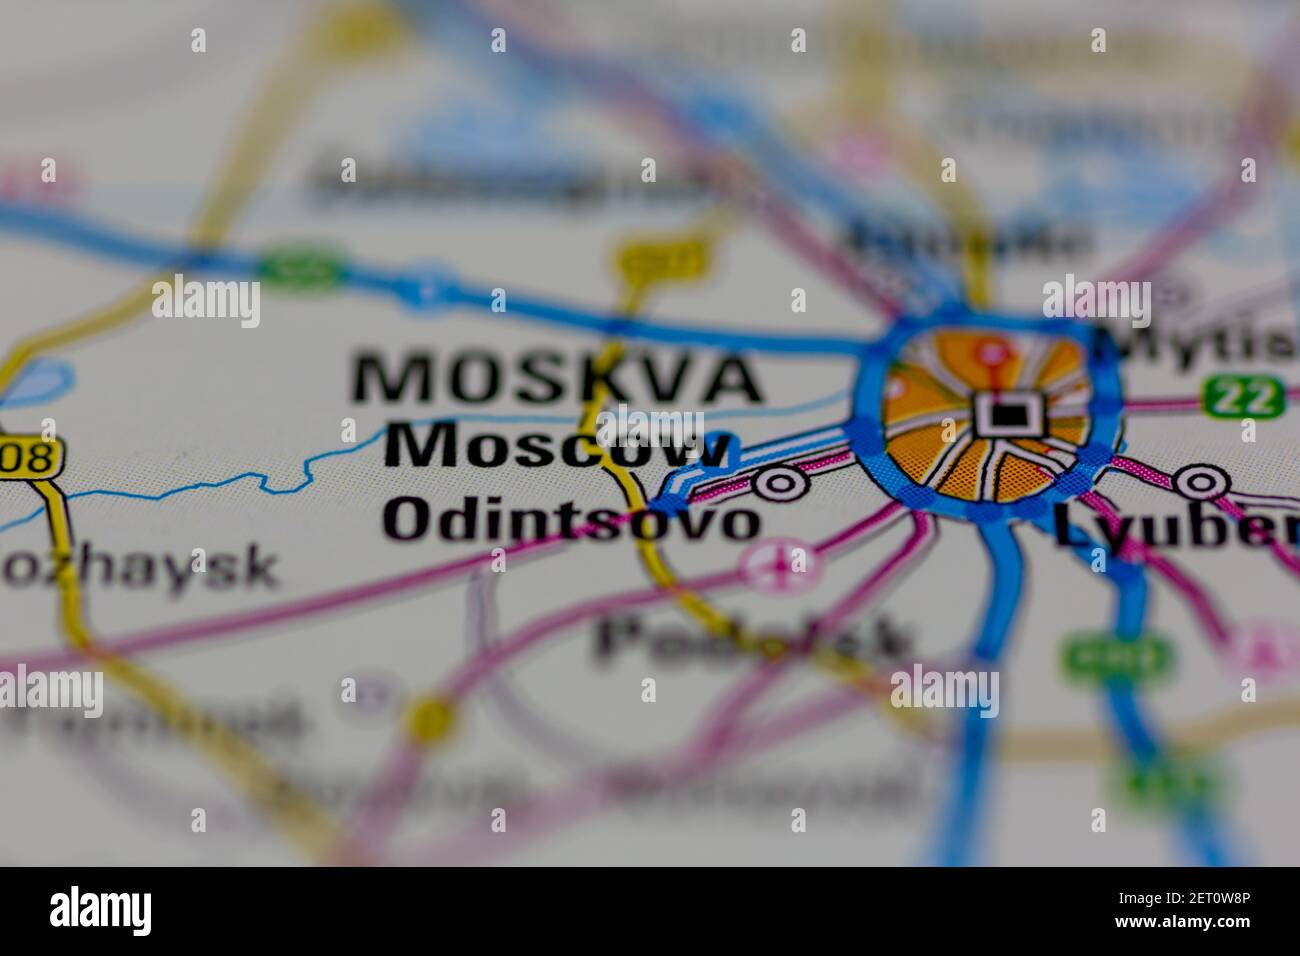 Moscow or Moskva Shown on a road map or Geography map Stock Photo